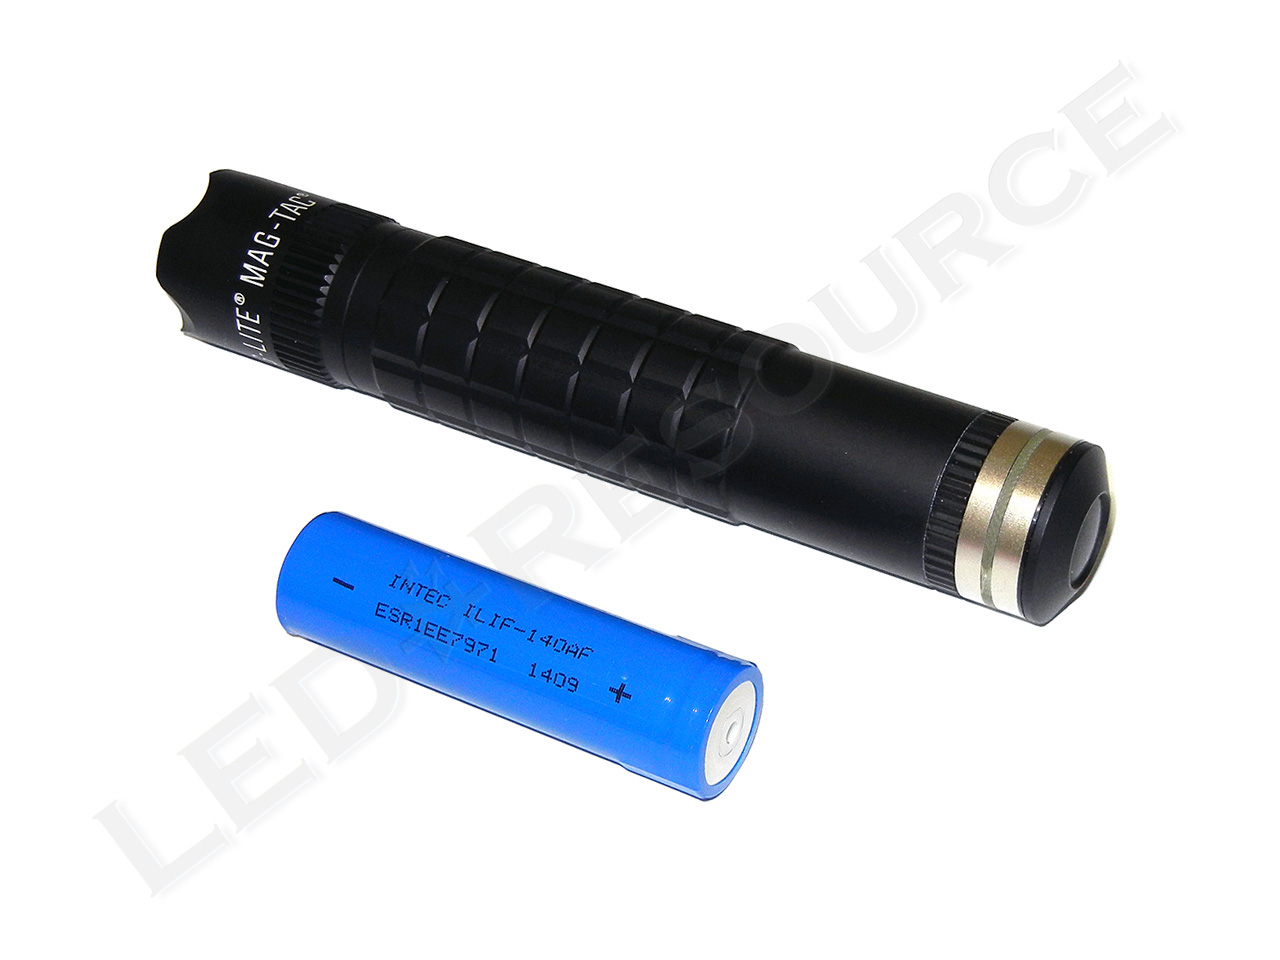 Lampe torche - Led Maglite Mag-Tac - Rechargeable